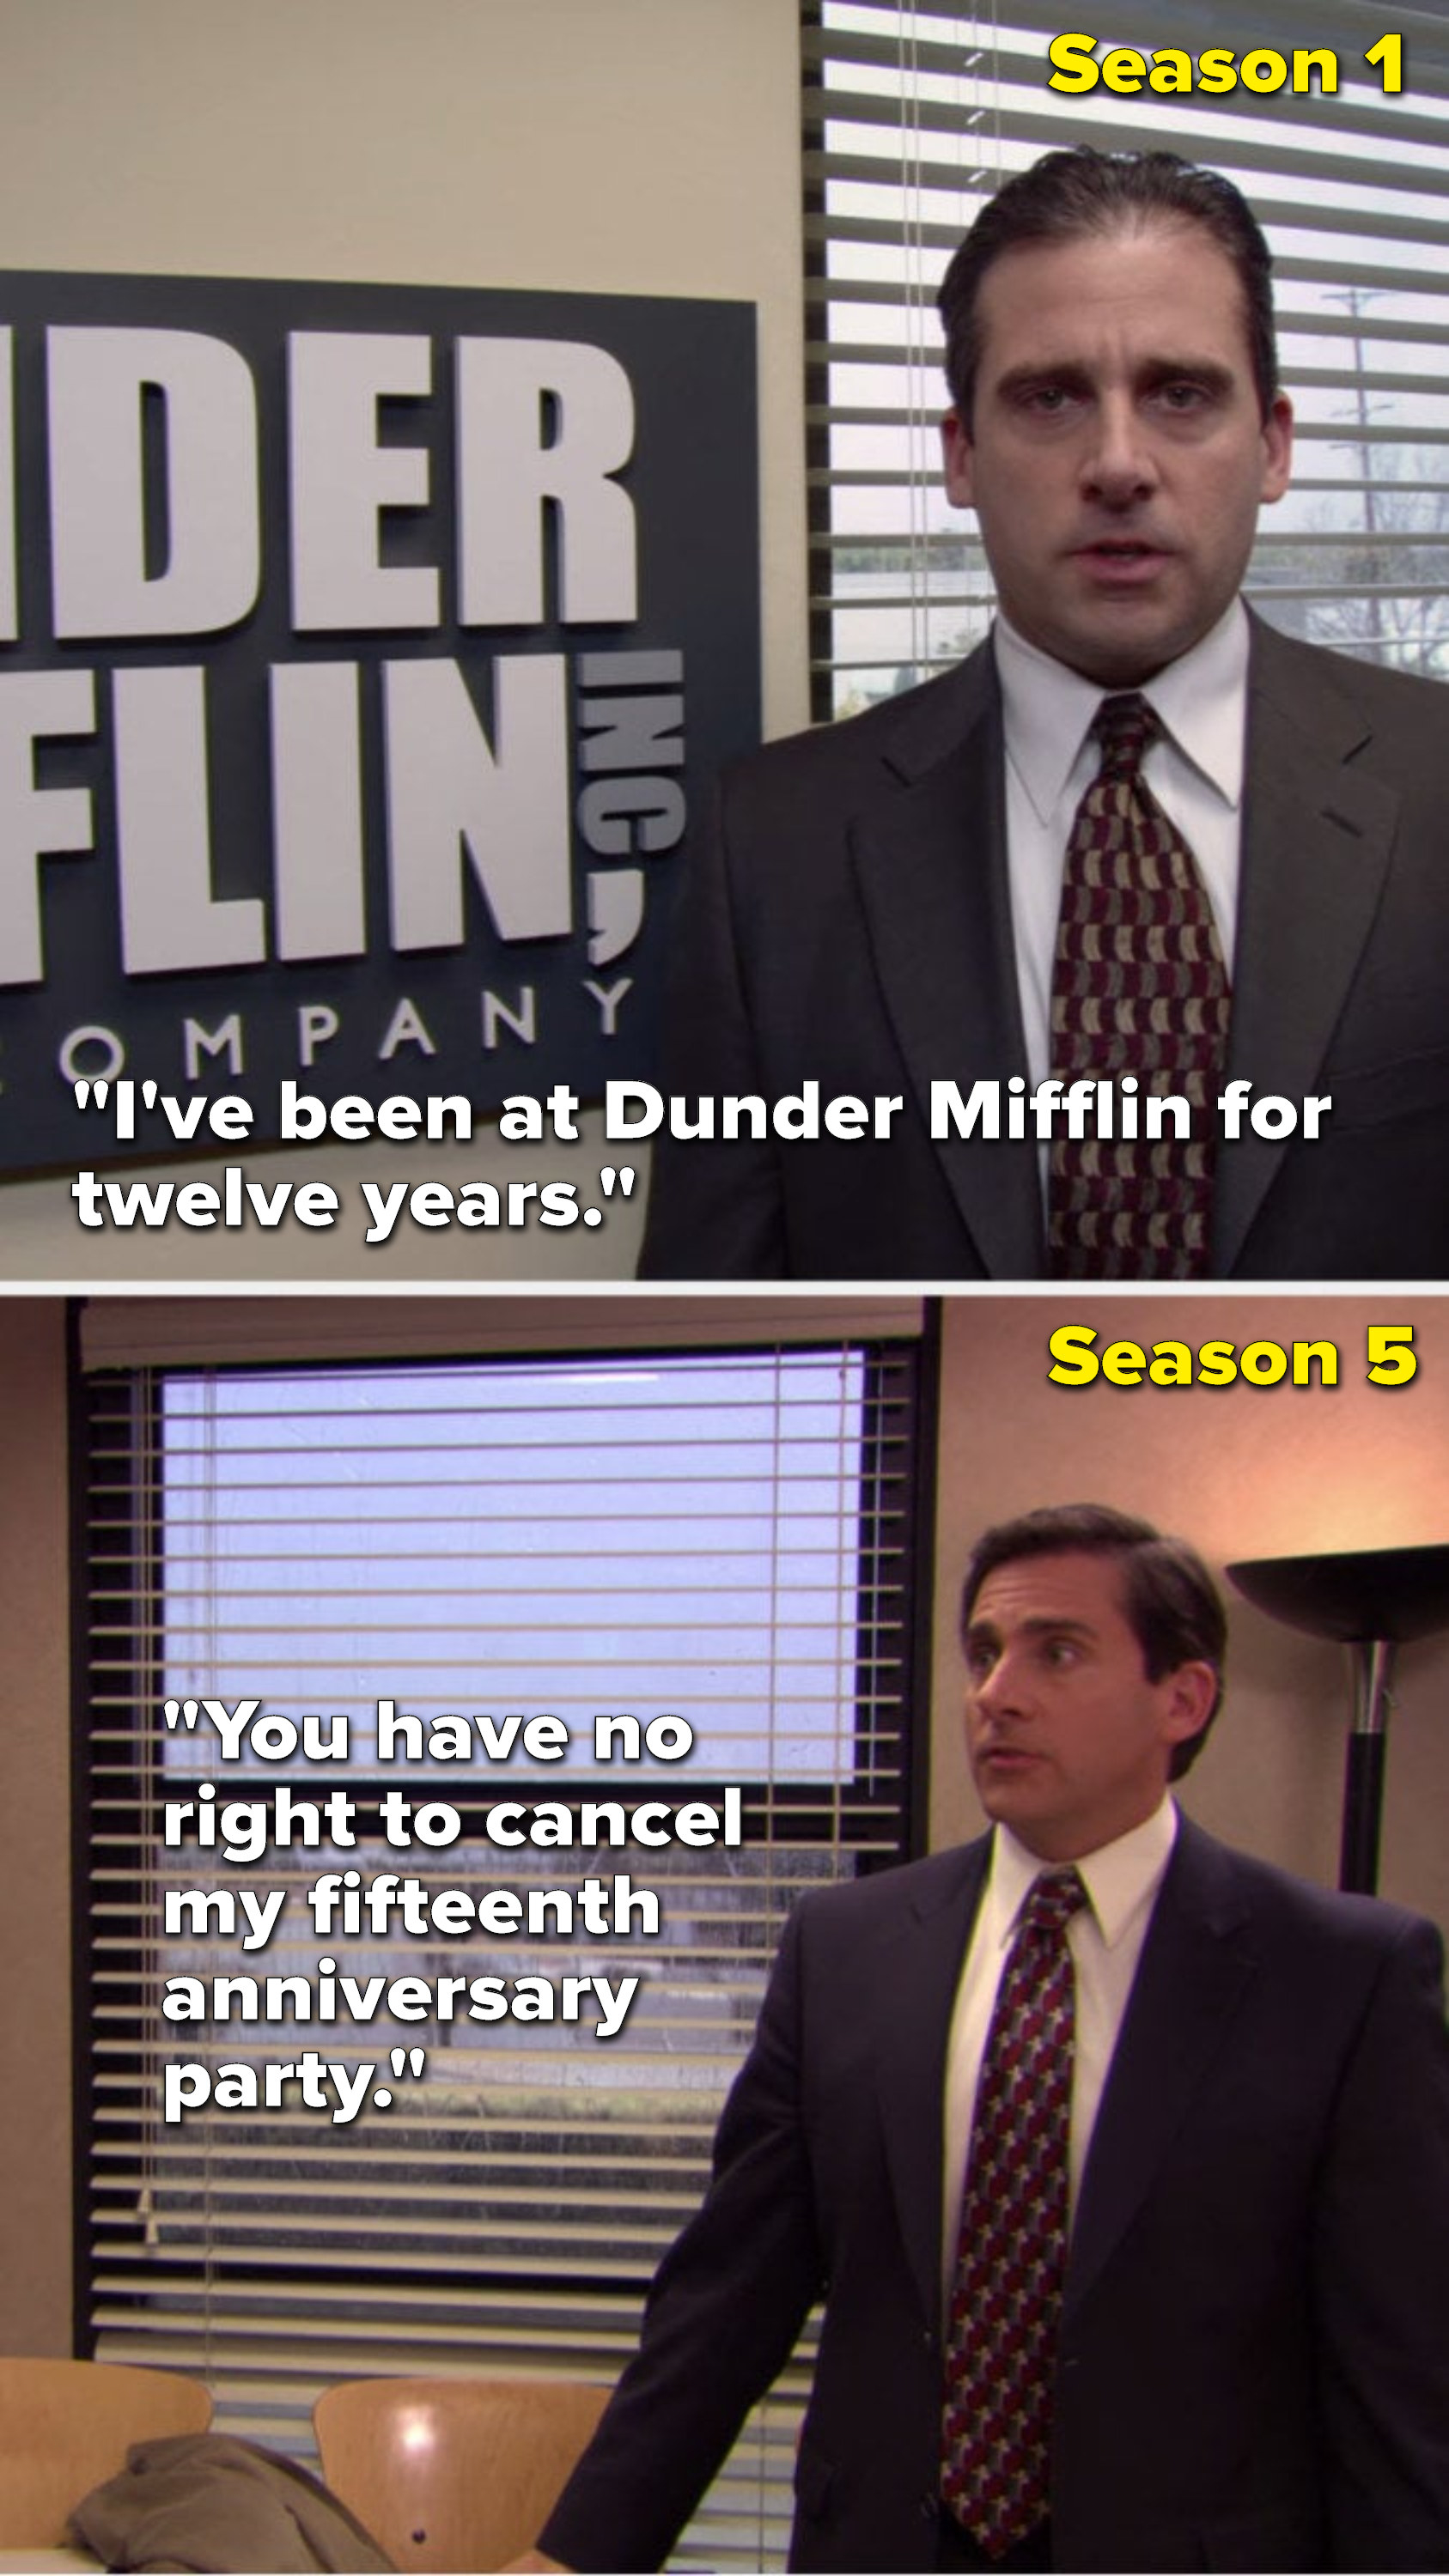 In Season 1, Michael says, &quot;I&#x27;ve been at Dunder Mifflin for twelve years&quot; and in Season 5 he says, &quot;You have no right to cancel my fifteenth anniversary party&quot;